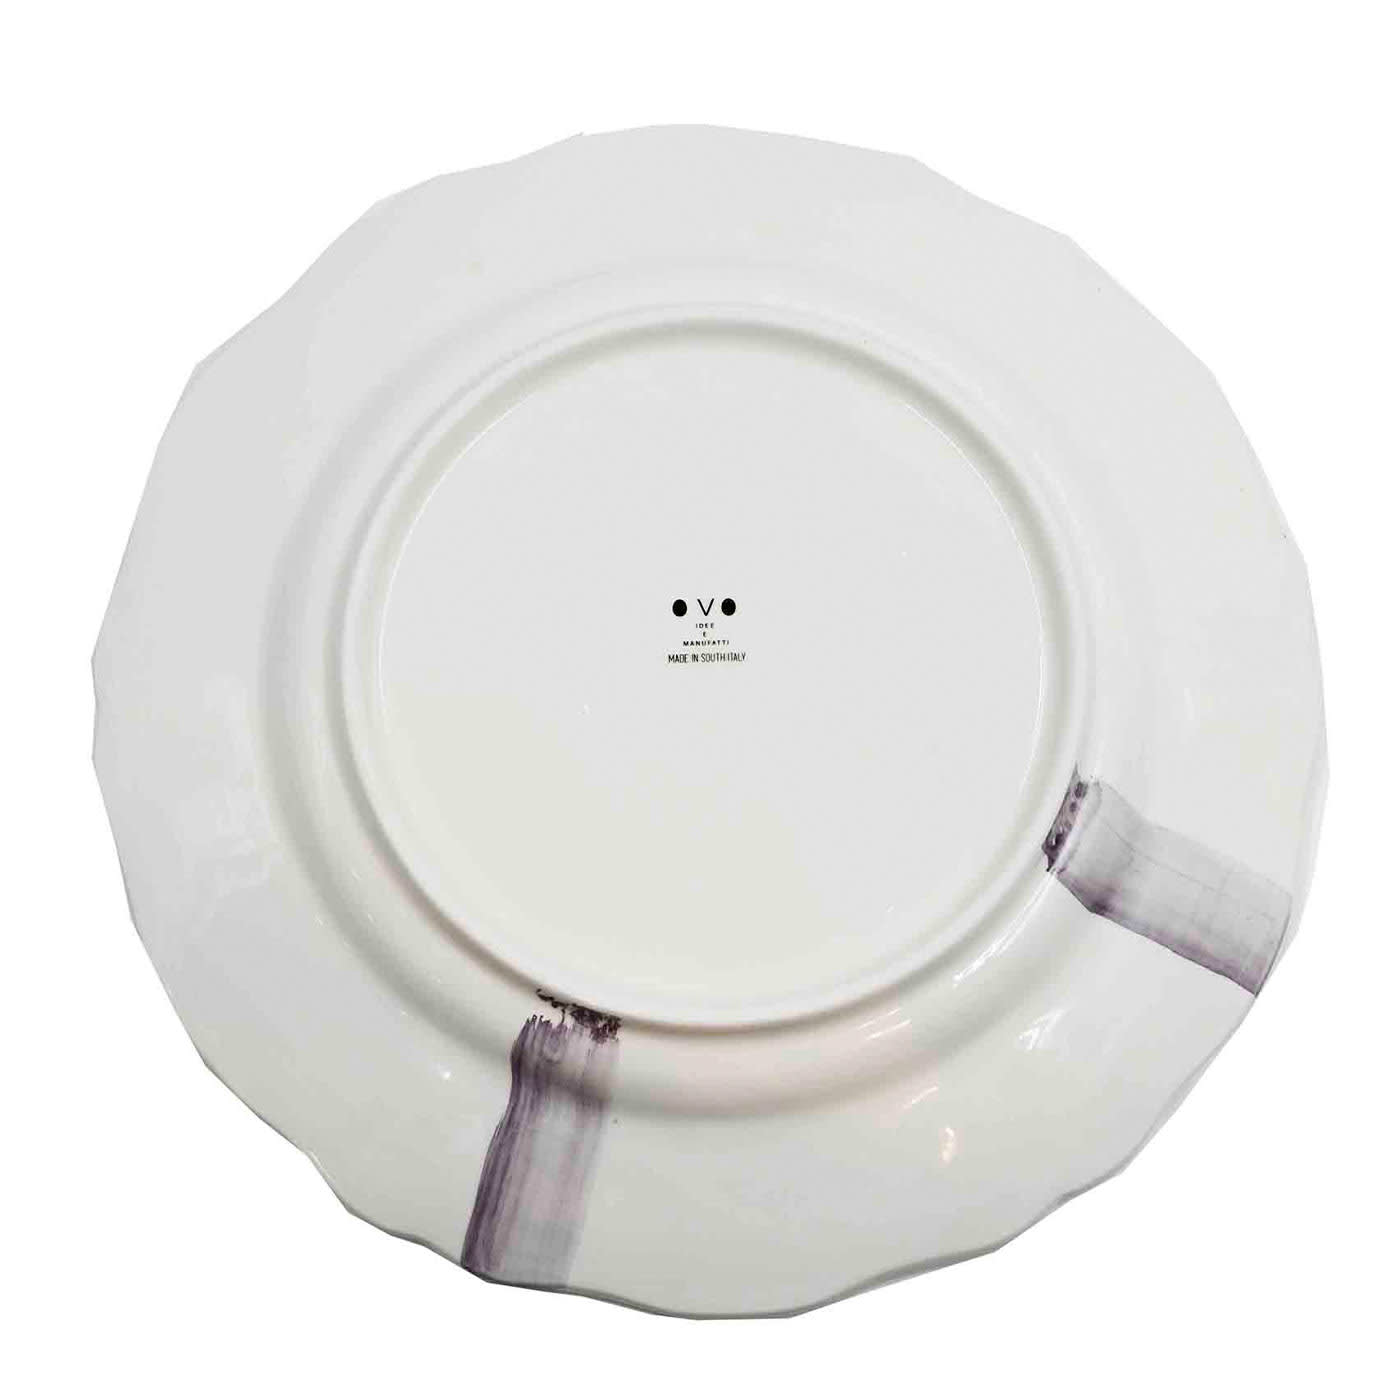 Timeless Handcrafted Ceramic Plate Masterpiece